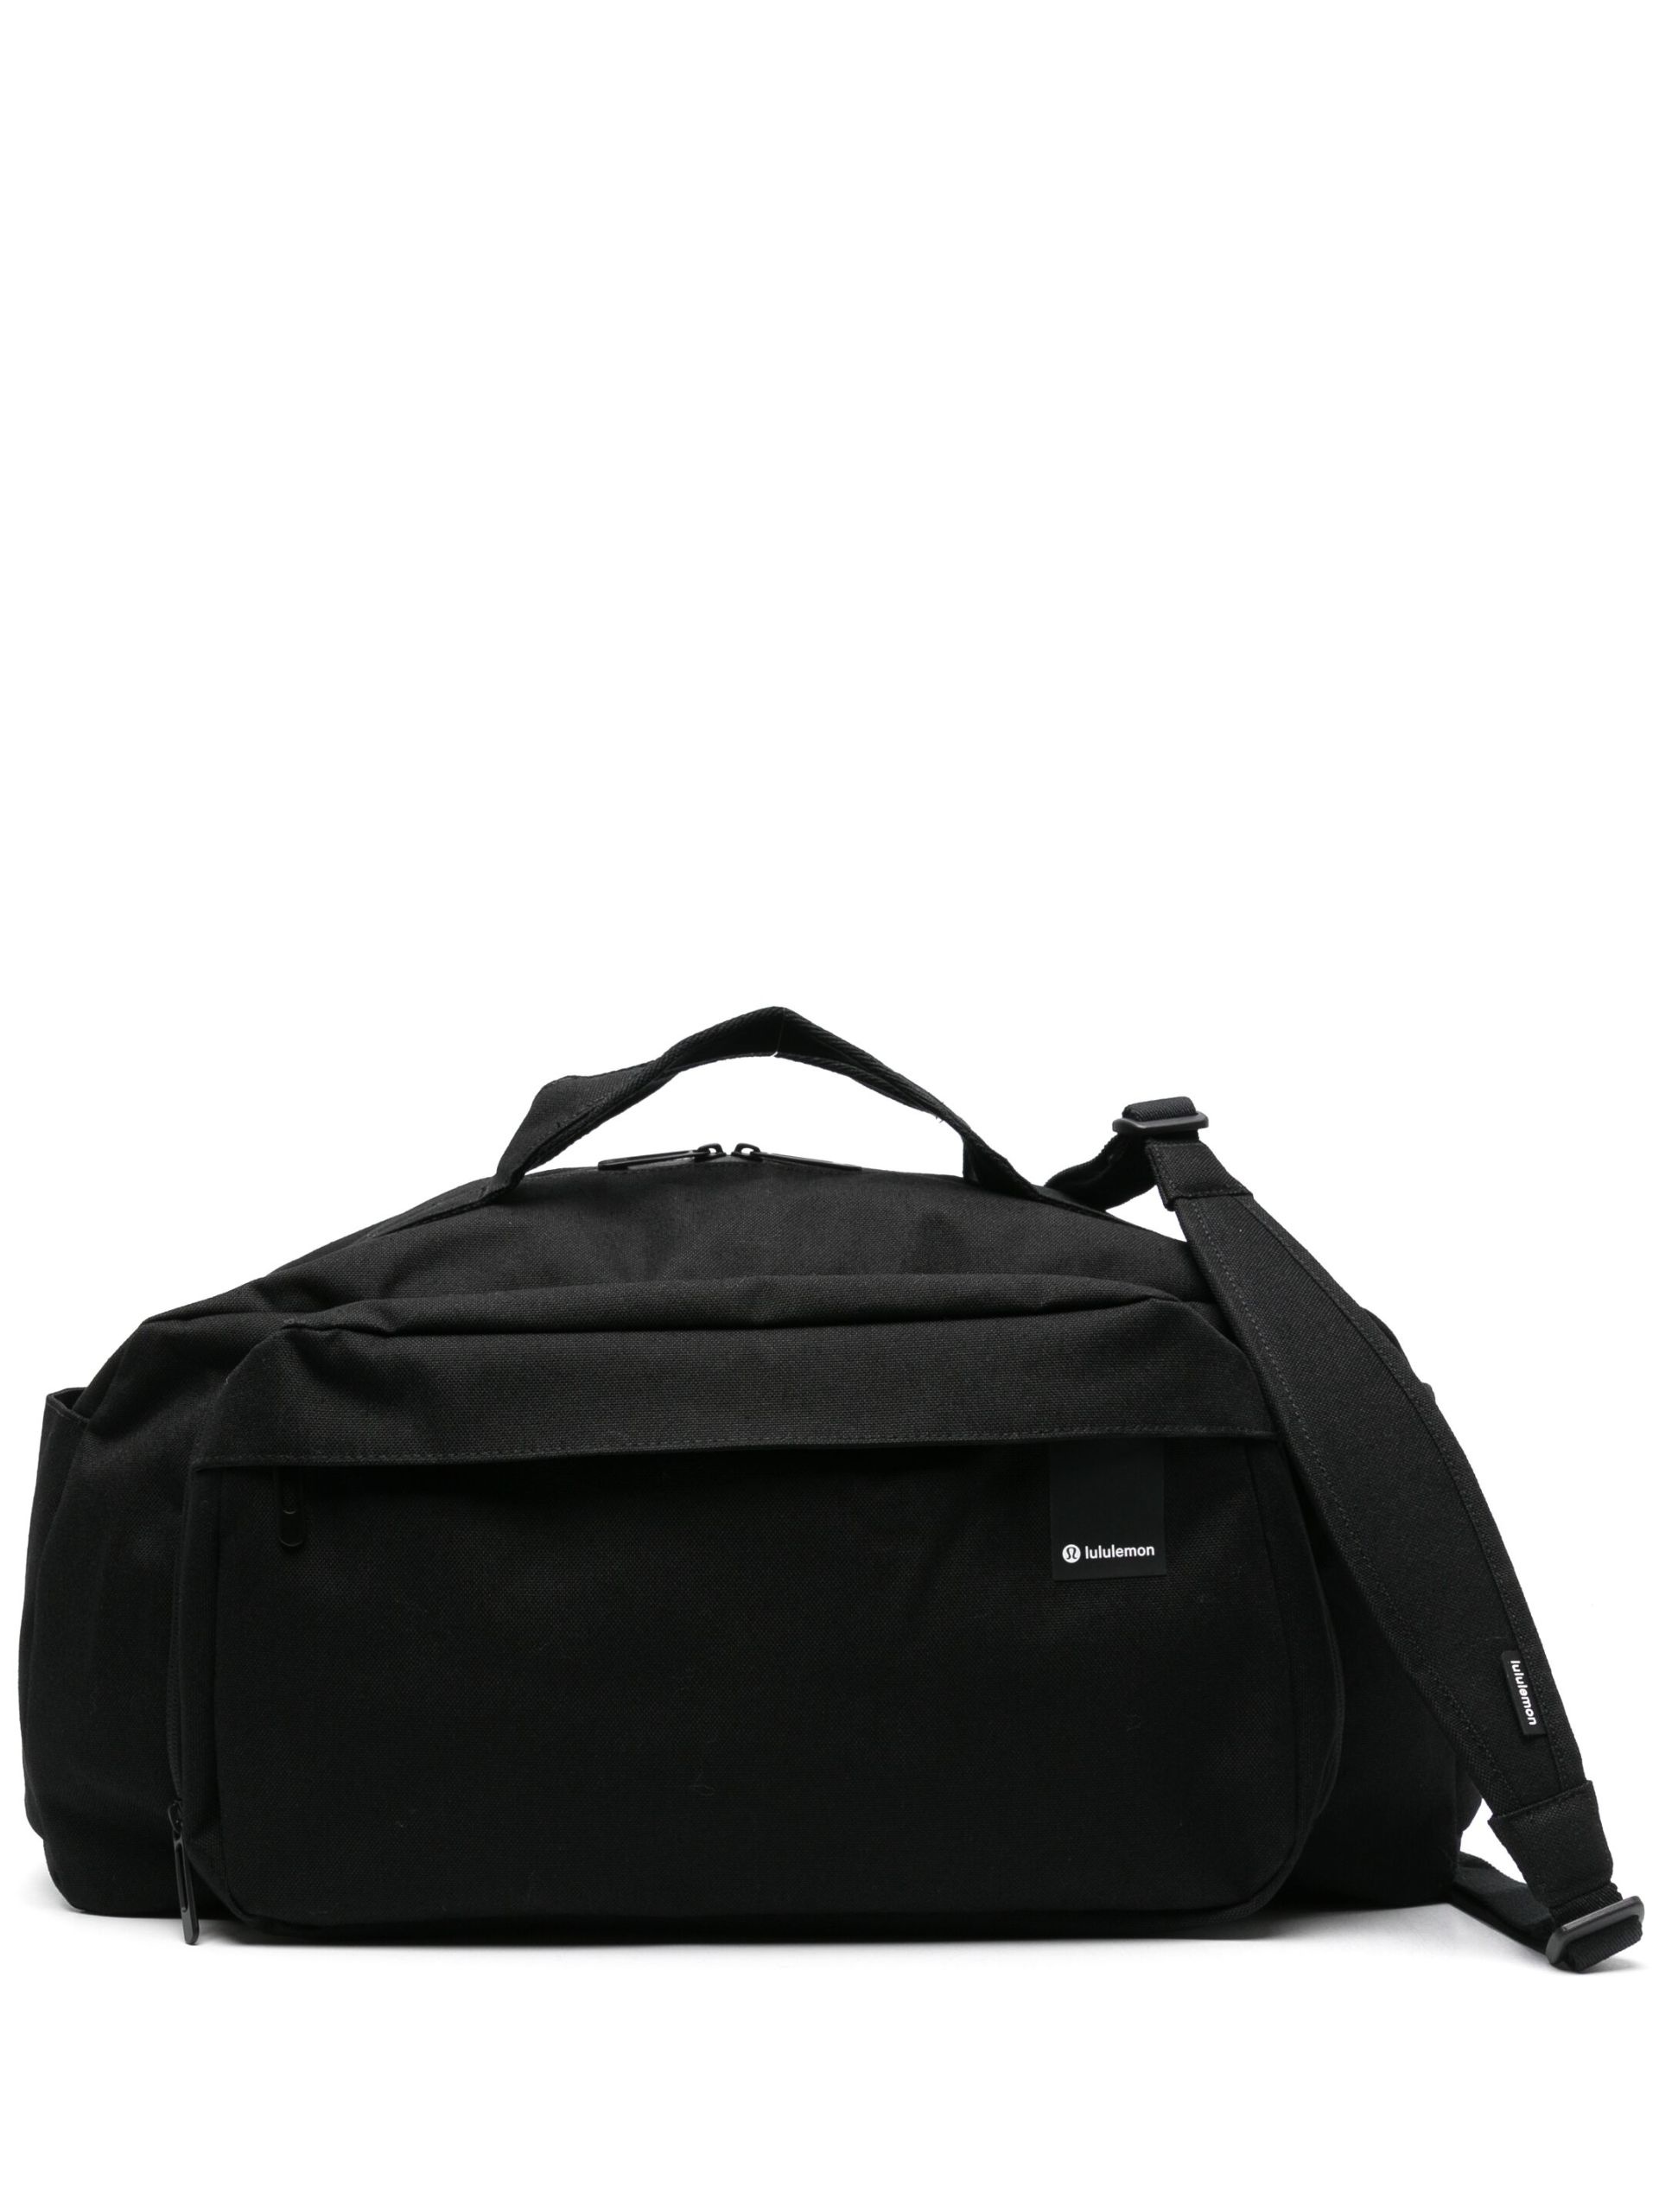 Black Command The Day Travel Bag - 1